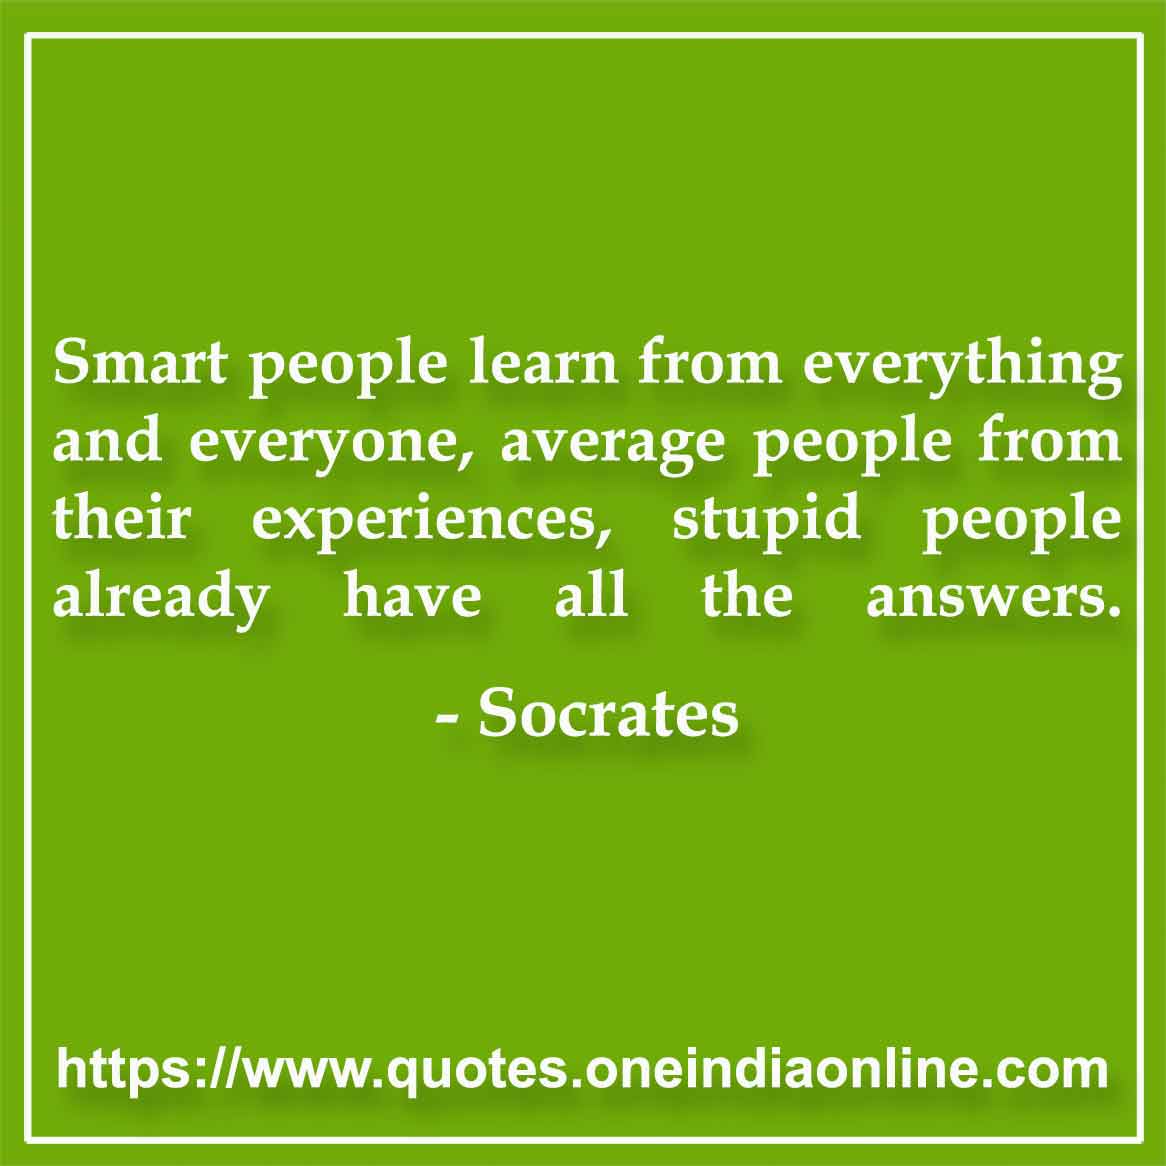 Smart people learn from everything and everyone, average people from their experiences, stupid people already have all the answers.

-  Socrates